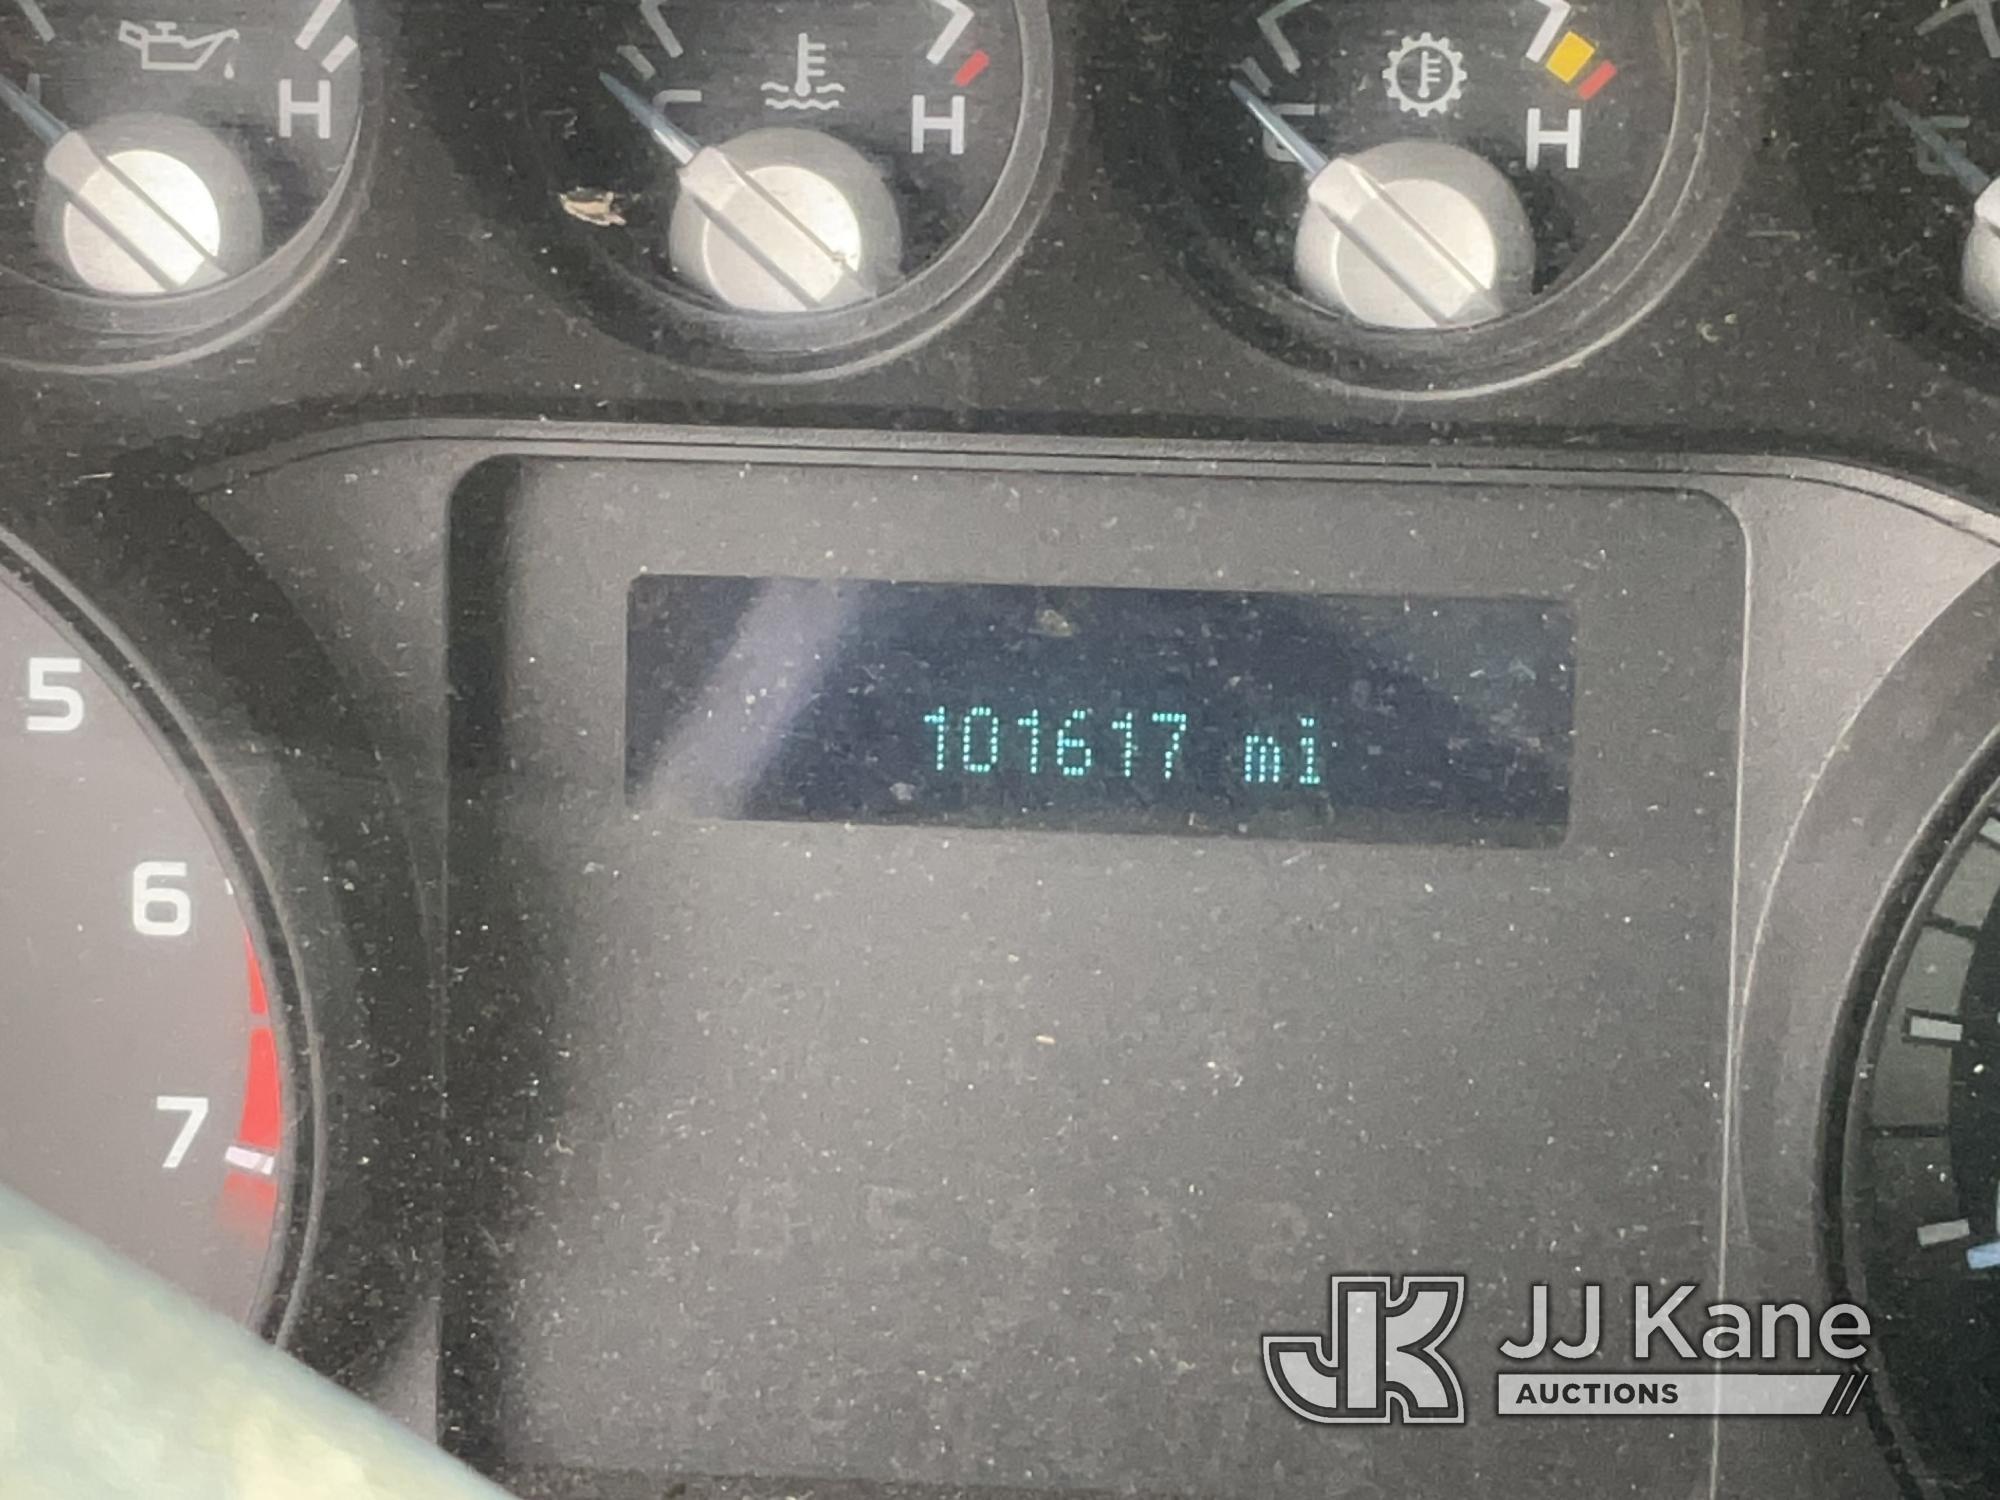 (Dixon, CA) 2013 Ford F150 Extended-Cab Pickup Truck Not Running, Ignition Damaged, Body Damage